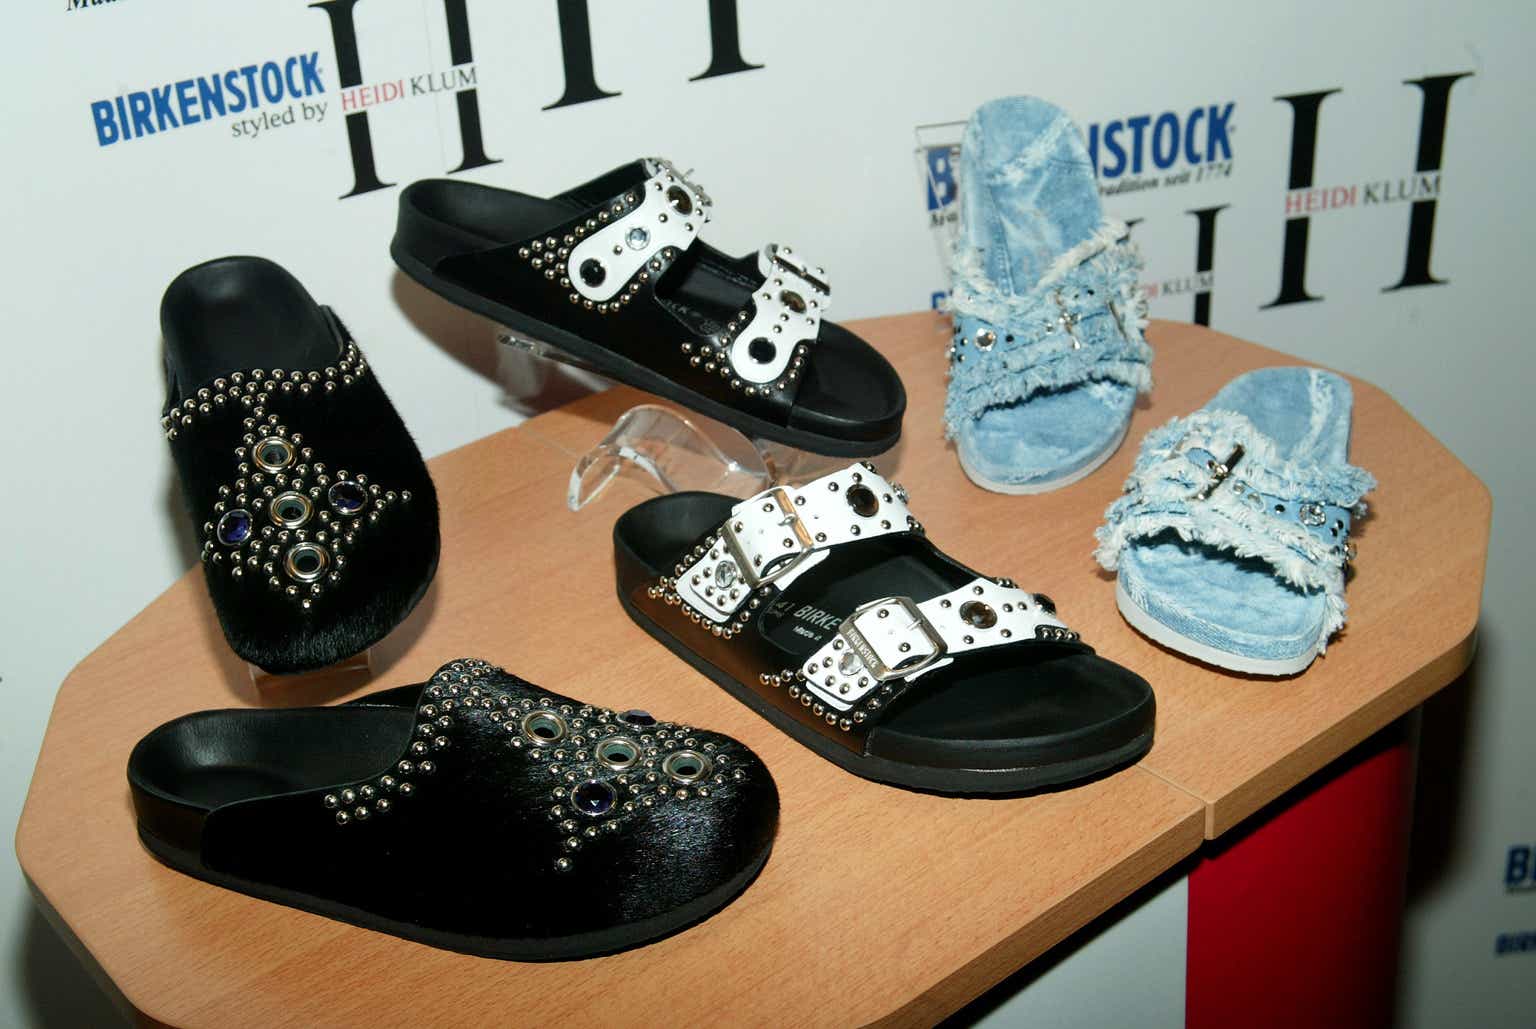 Birkenstock loses 10% in NYSE debut: going public was 'the second